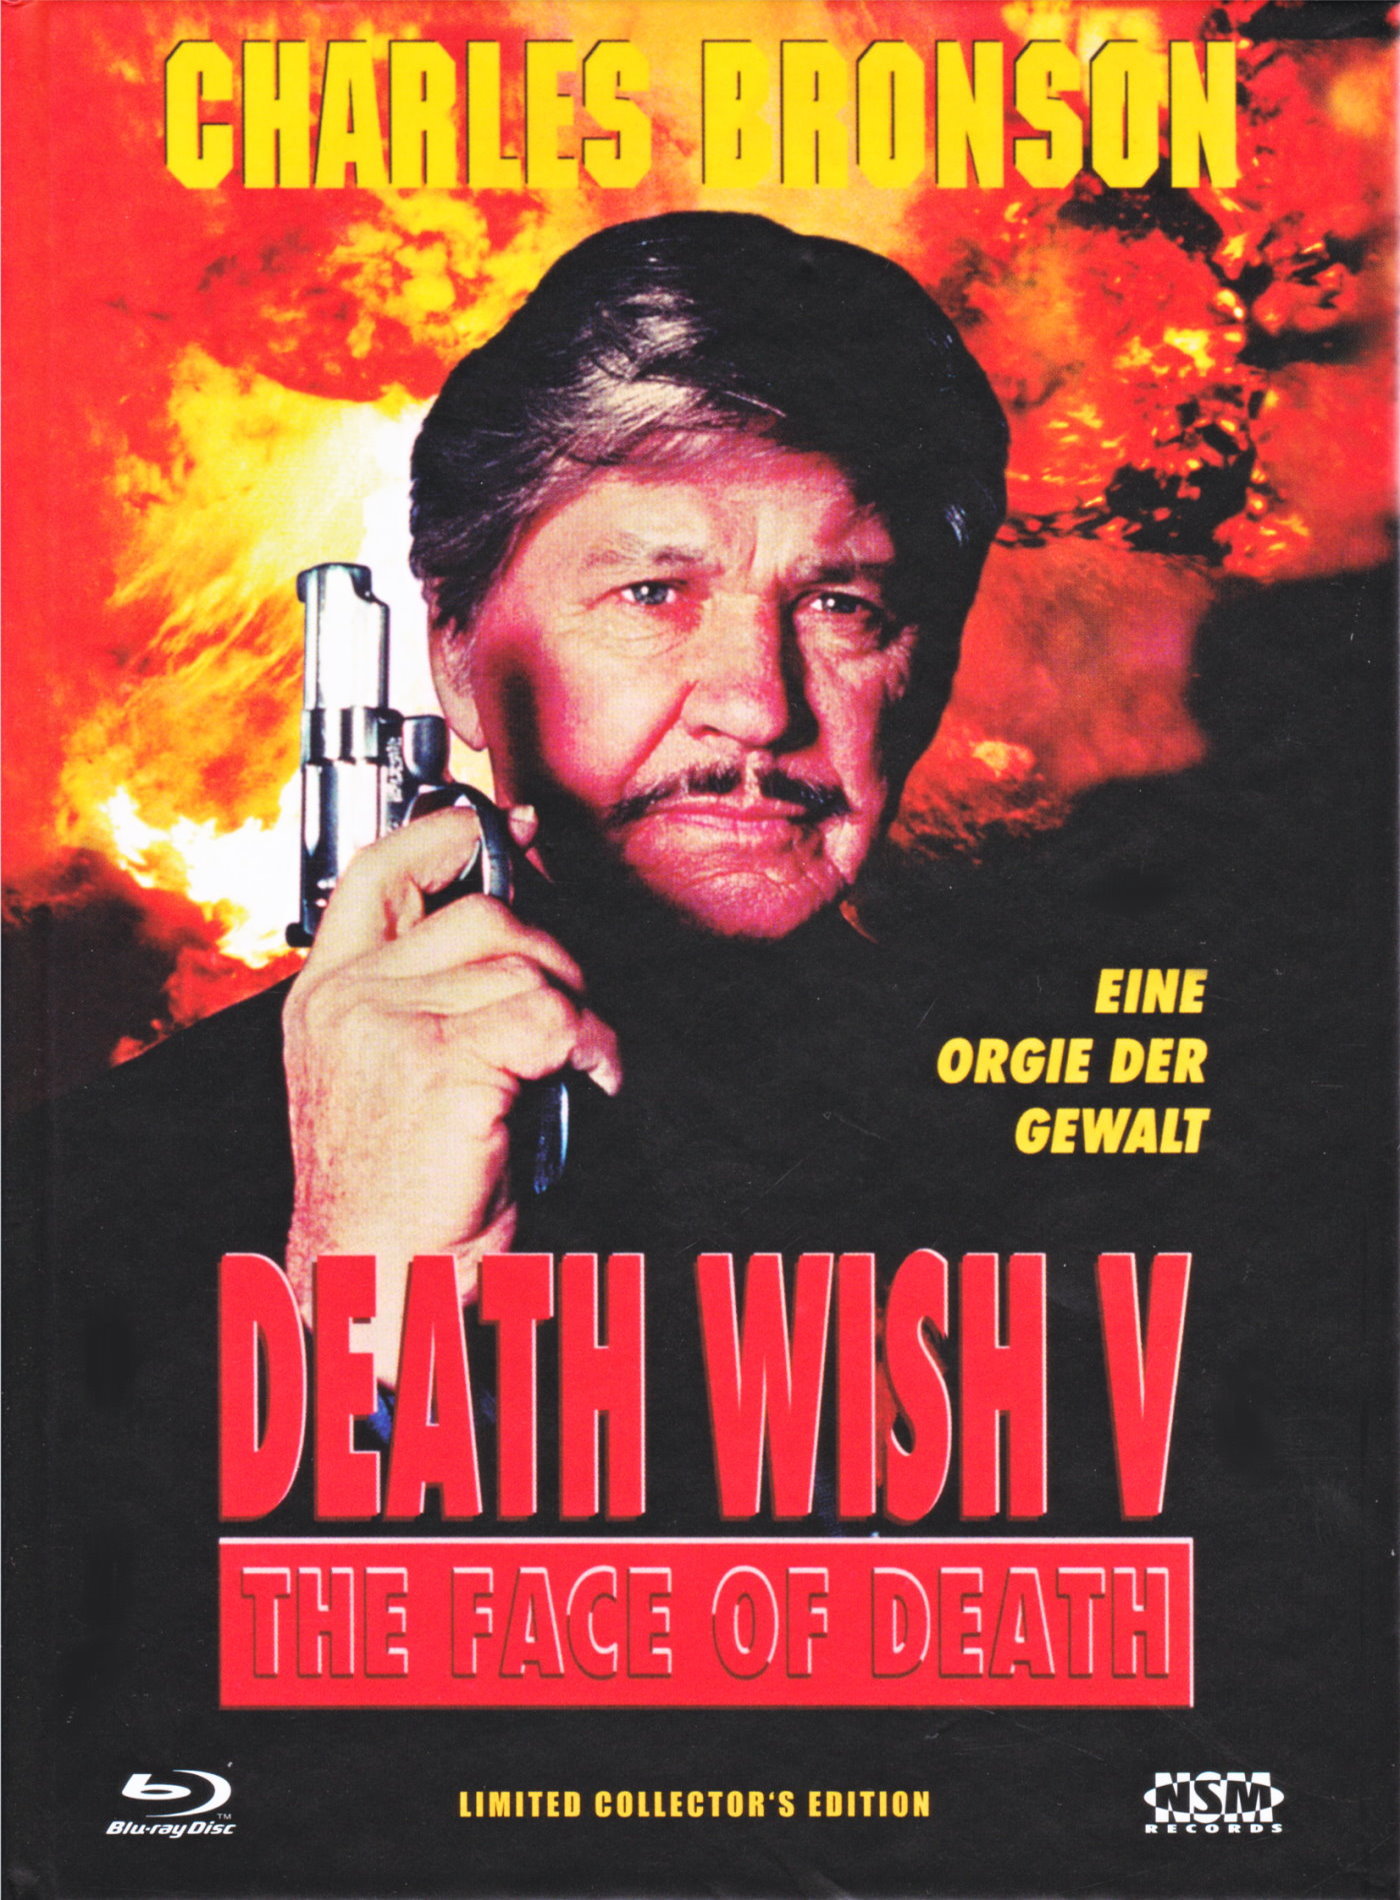 Cover - Death Wish V - The Face of Death.jpg